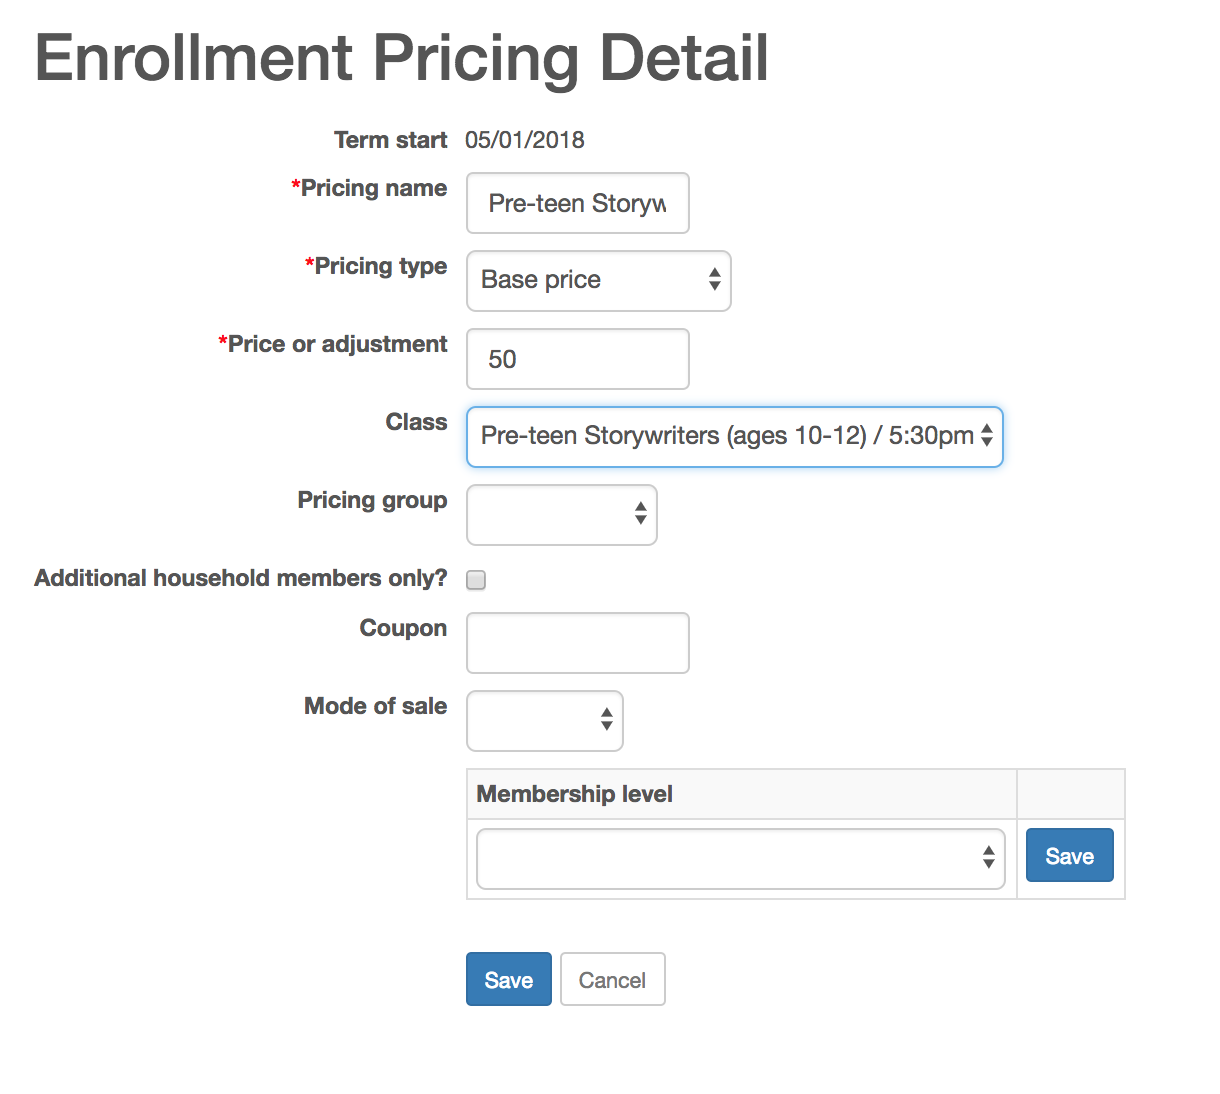 example_enrollmentpricing.png